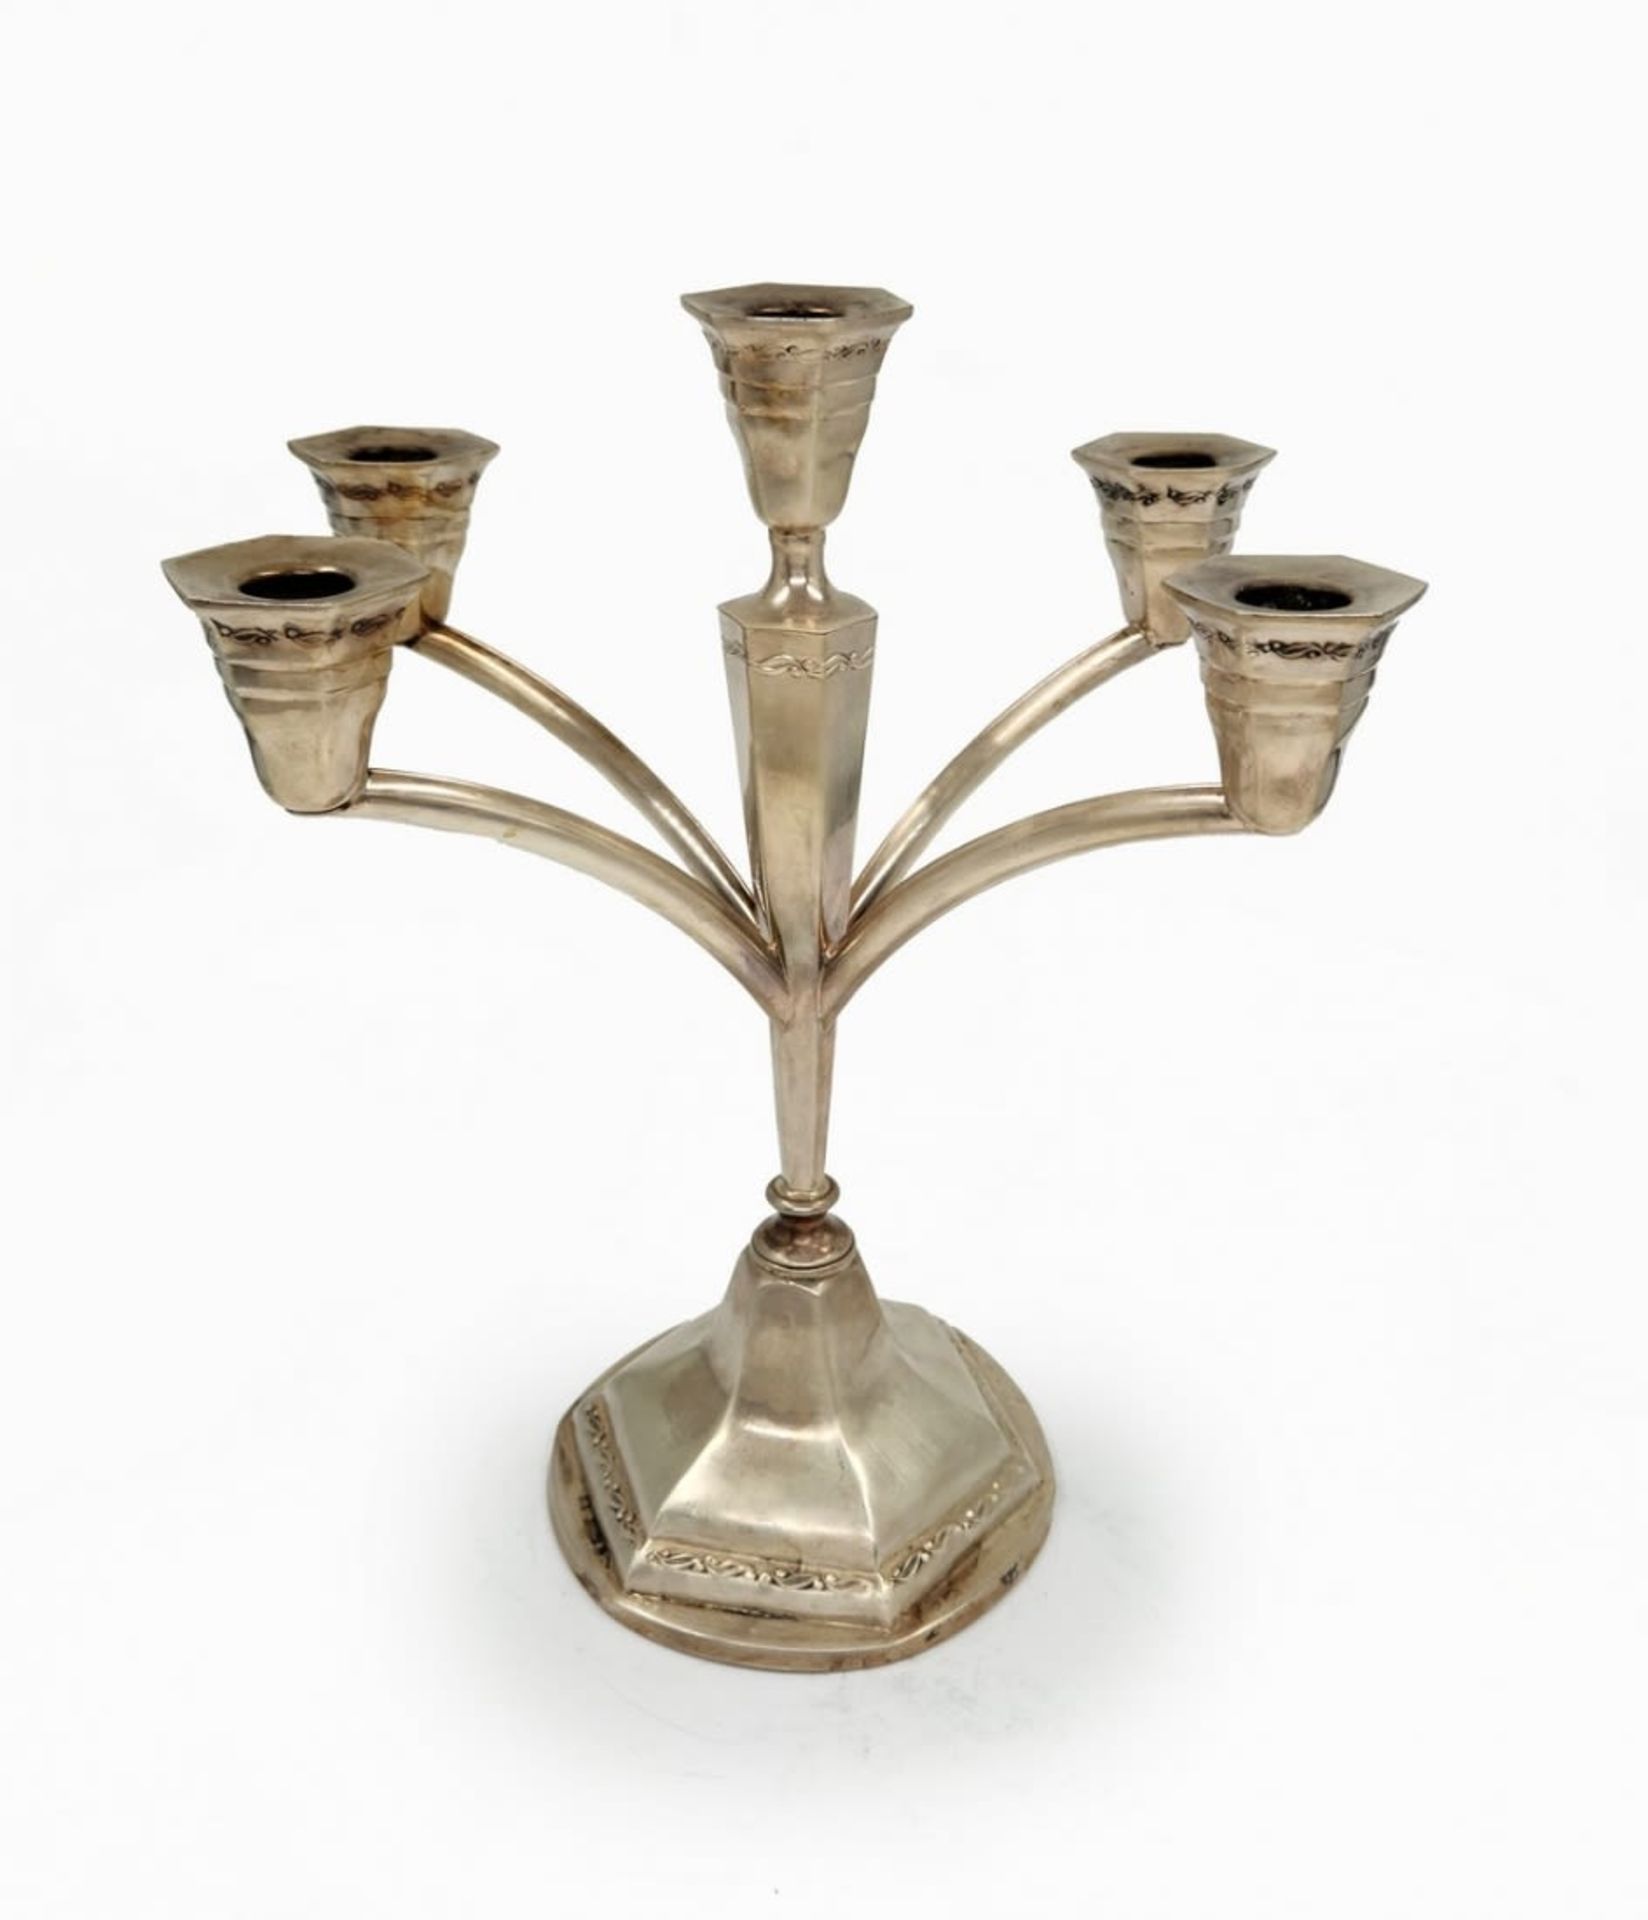 A silver candlestick for five candles, made by the 'Hazorifim' company, made of '800' silver,